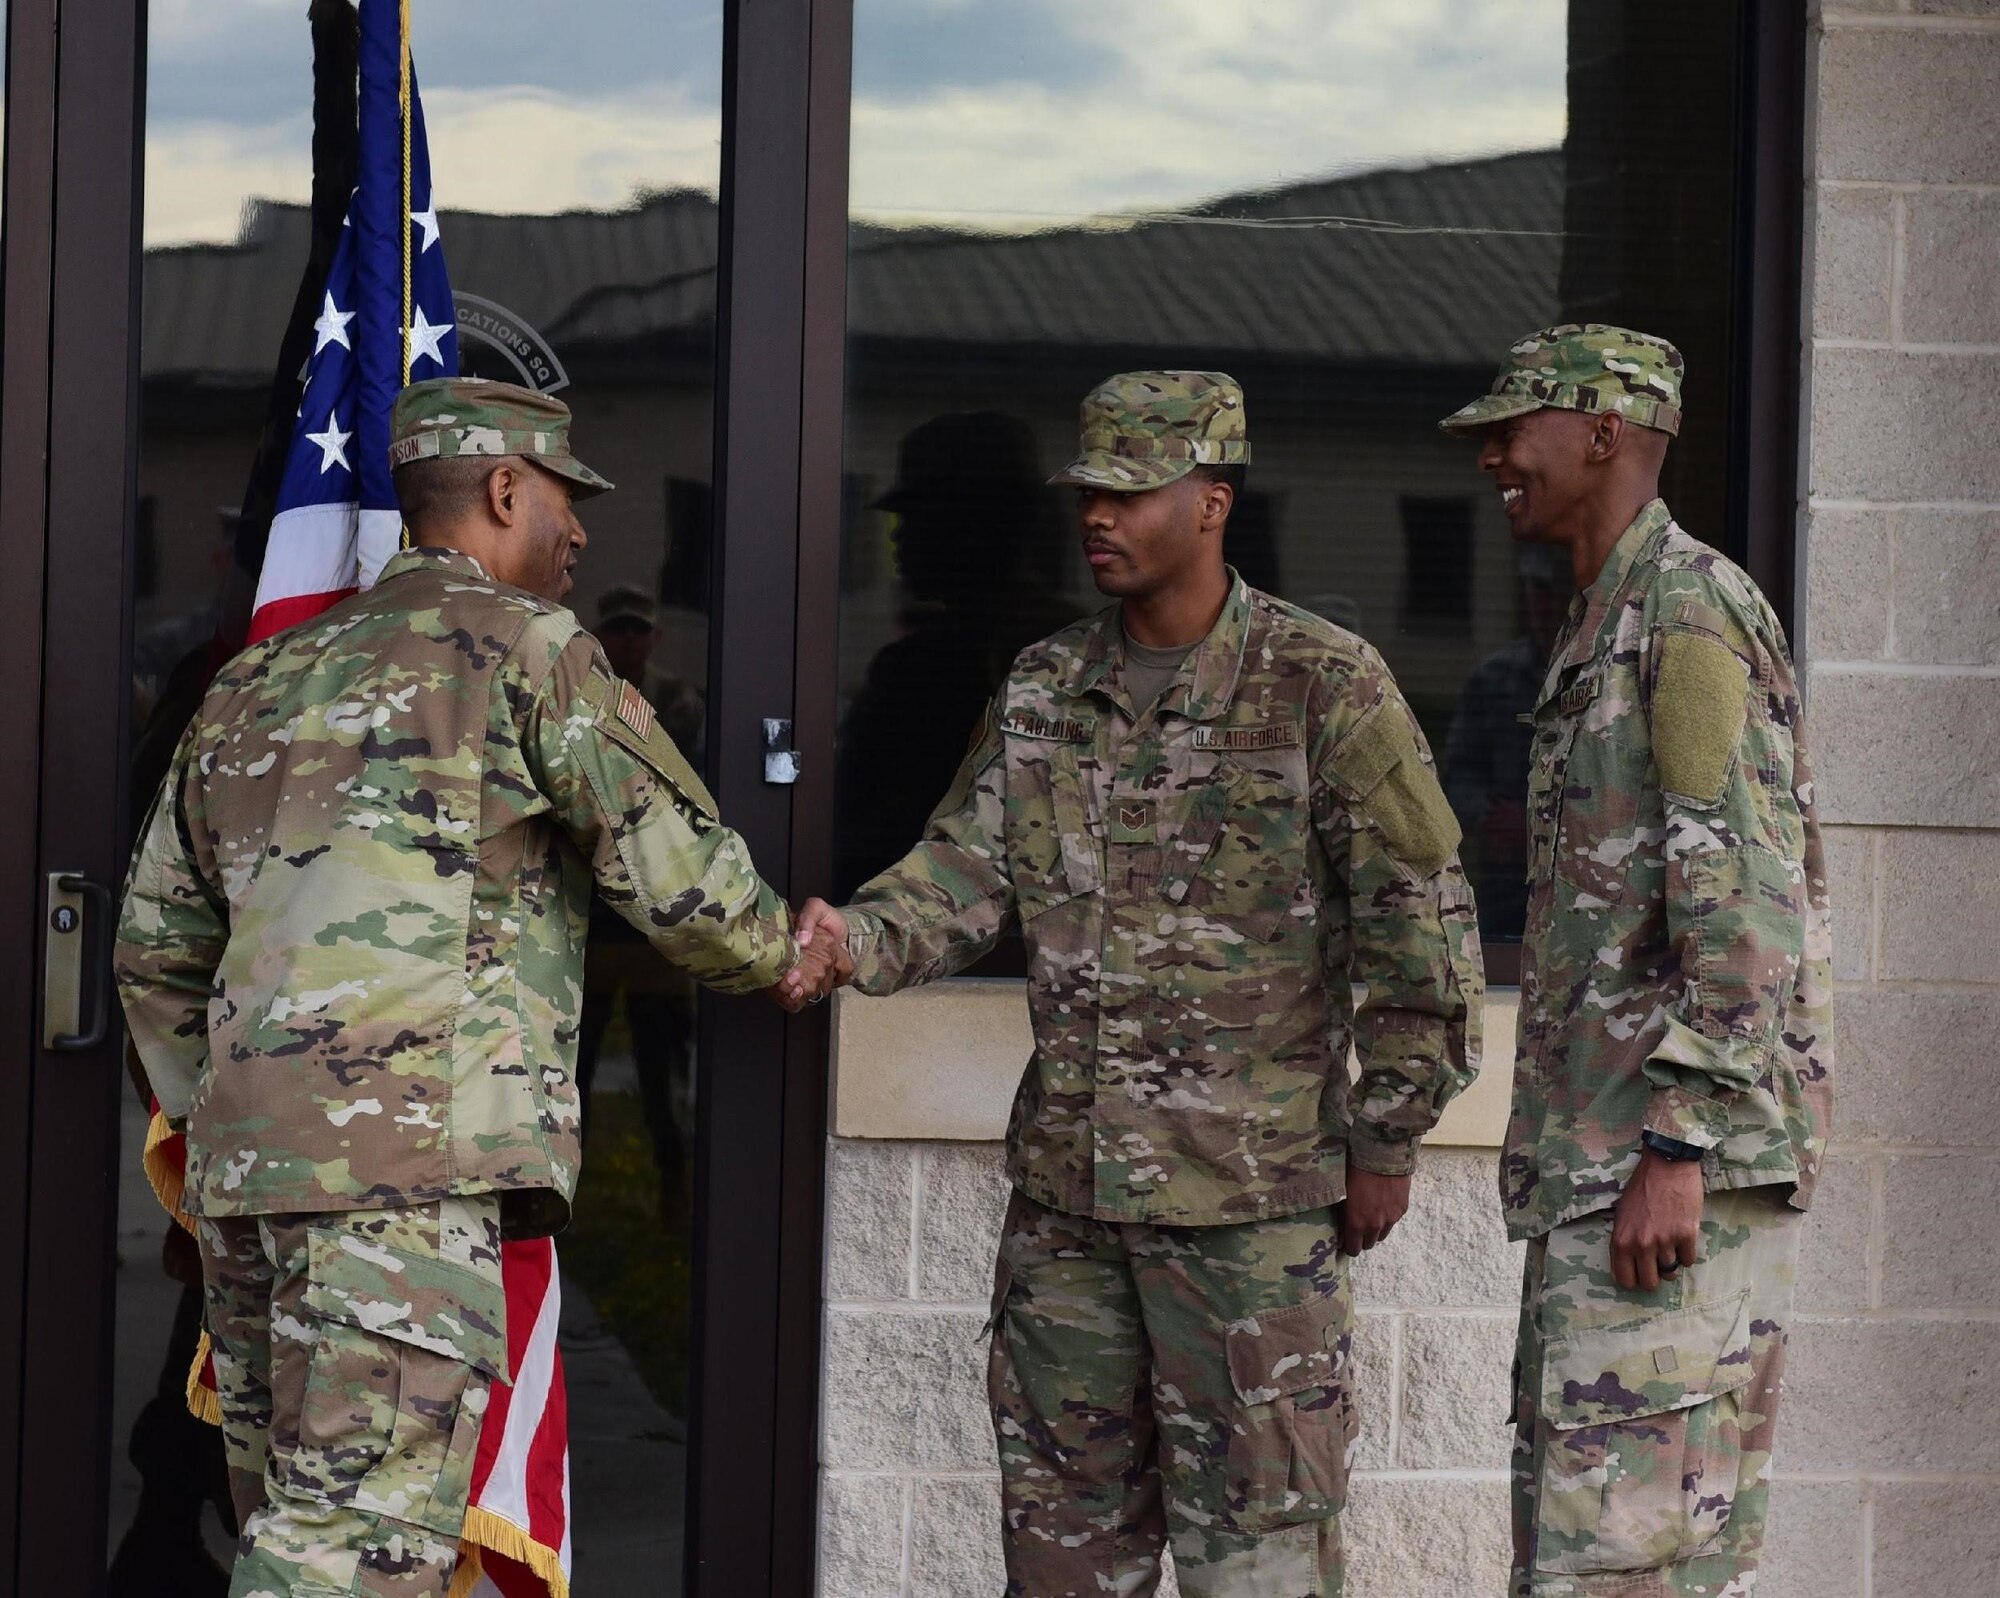 Air Force Maj. James Johnson, 325th Communication Squadron commander, congratulates Staff Sgt. Abrahm Paulding (center) and Senior Airman Antoine Brown (right), 325th CS cyber systems supervisors, on their re-enlistment at Tyndall Air Force Base, Fla., Nov. 30, 2018. The ceremony was the first to take place on Tyndall since Hurricane Michael hit in October. (U.S. Air Force photo by Senior Airman Cody R. Miller)